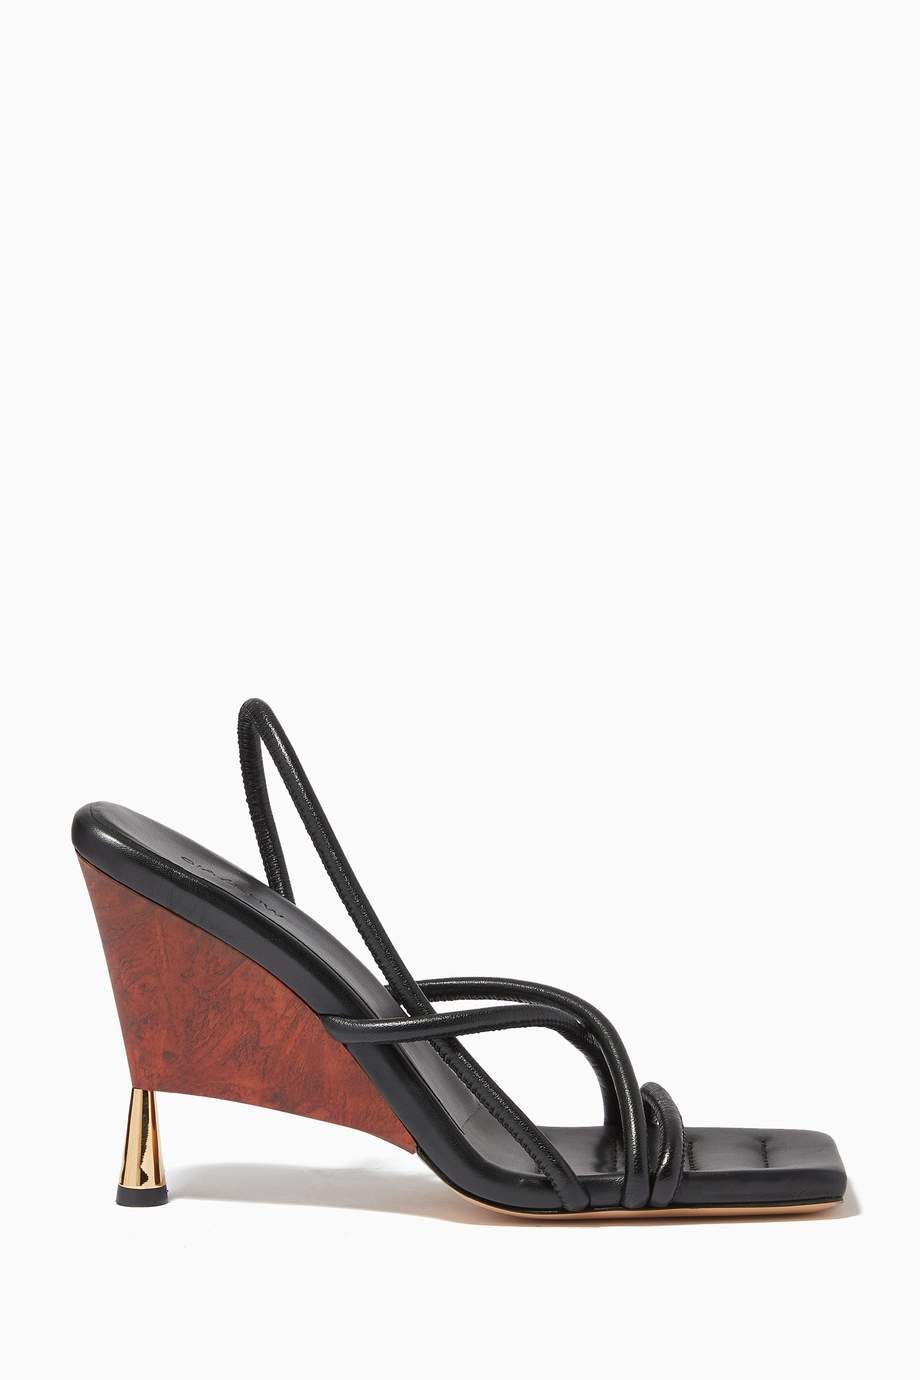 Shop Gia Couture Black x RHW Rosie 2 105 Strappy Sandals in Leather for ...